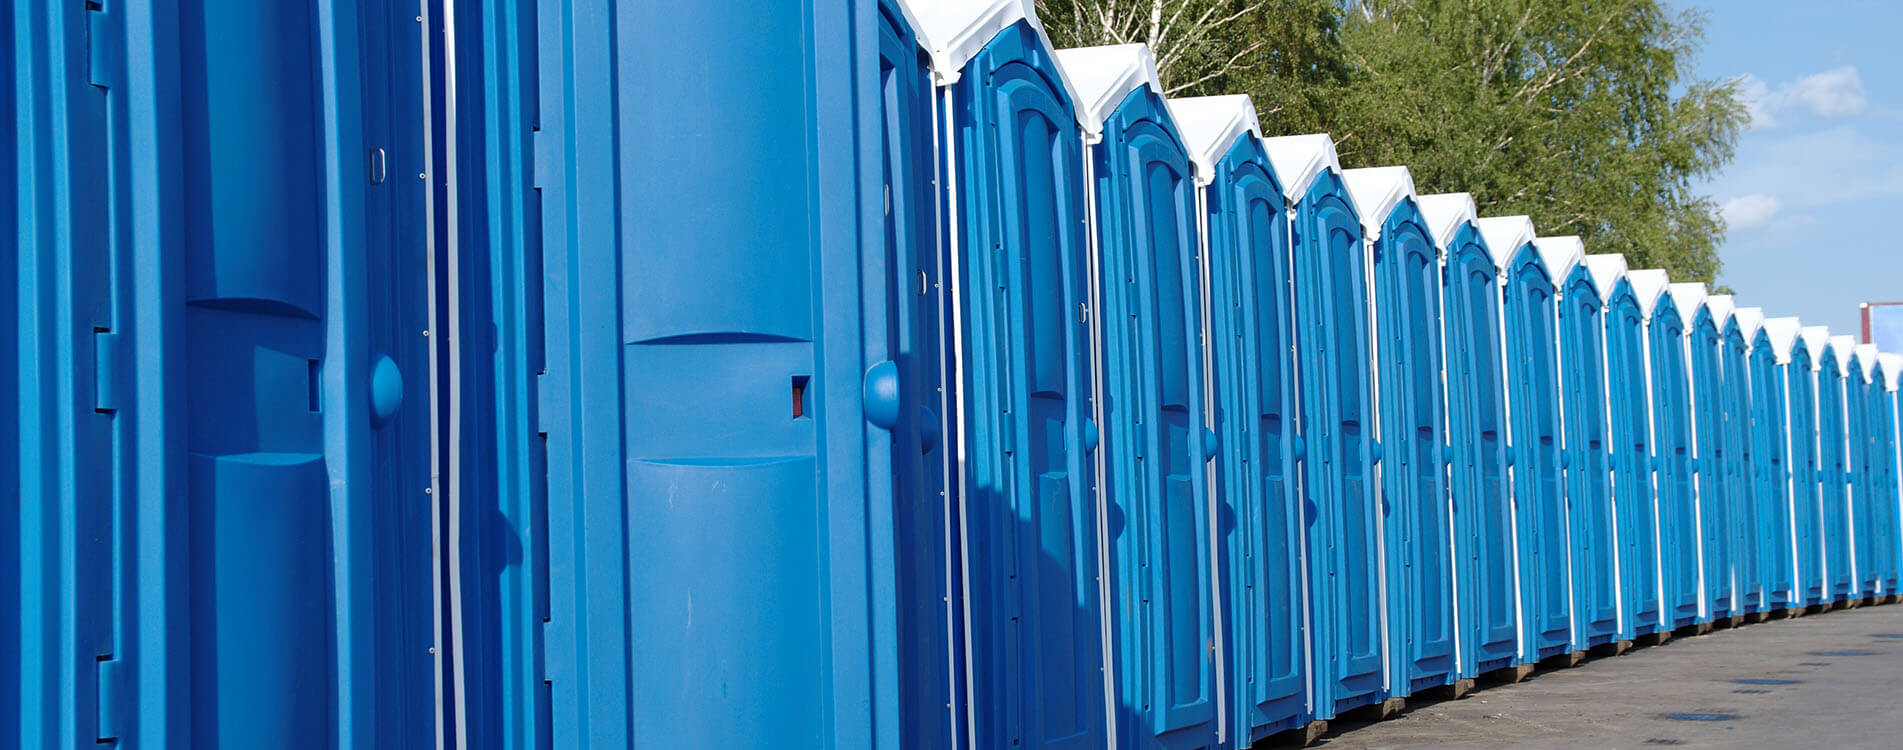 Annapolis, Glen Burnie and Pasadena
    Portable Toilet Rentals, Roll-Off Dumpster Rentals and Septic Company